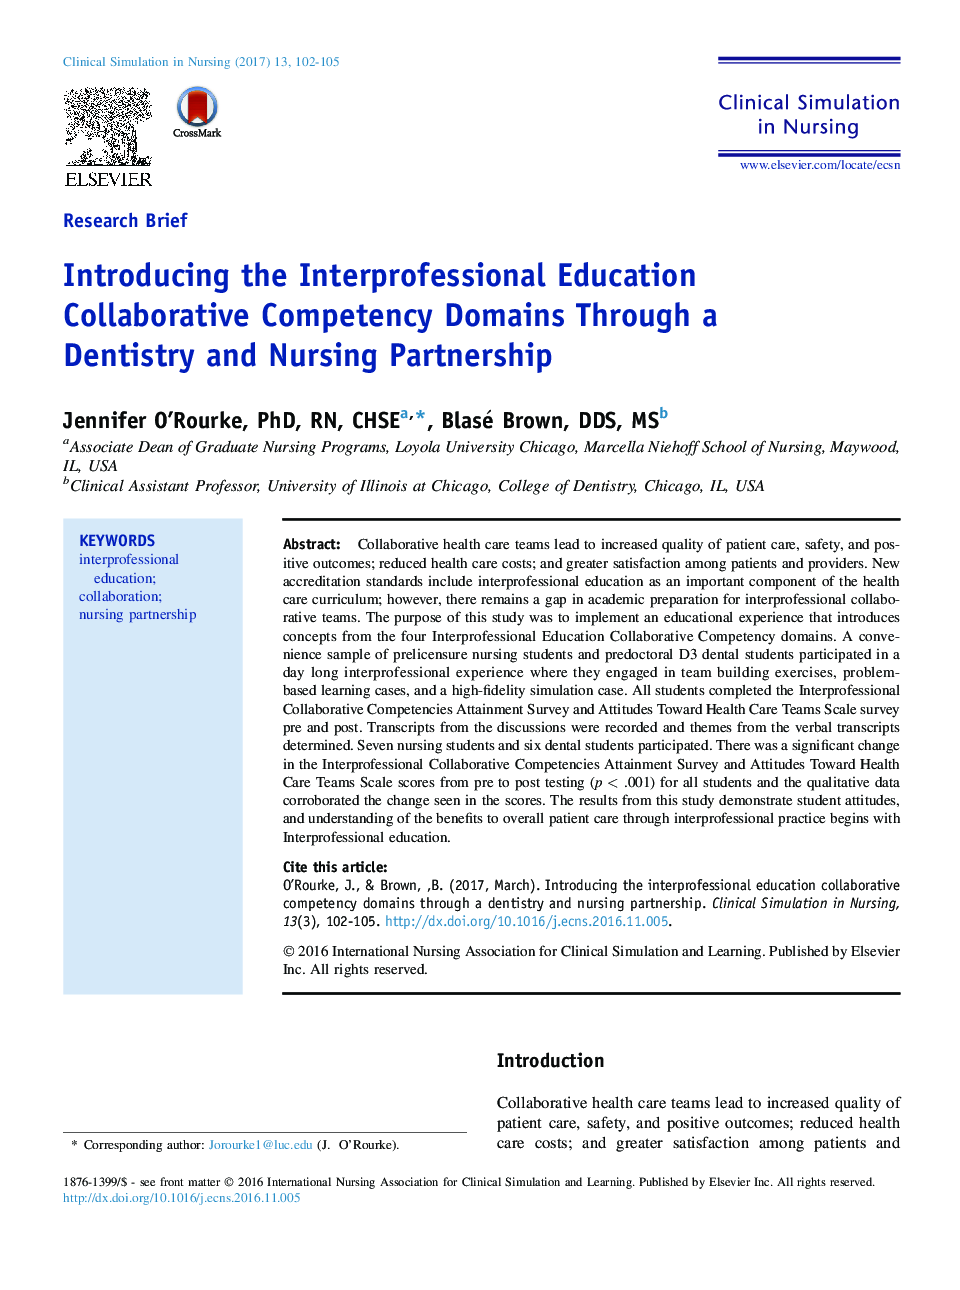 Introducing the Interprofessional Education Collaborative Competency Domains Through a Dentistry and Nursing Partnership